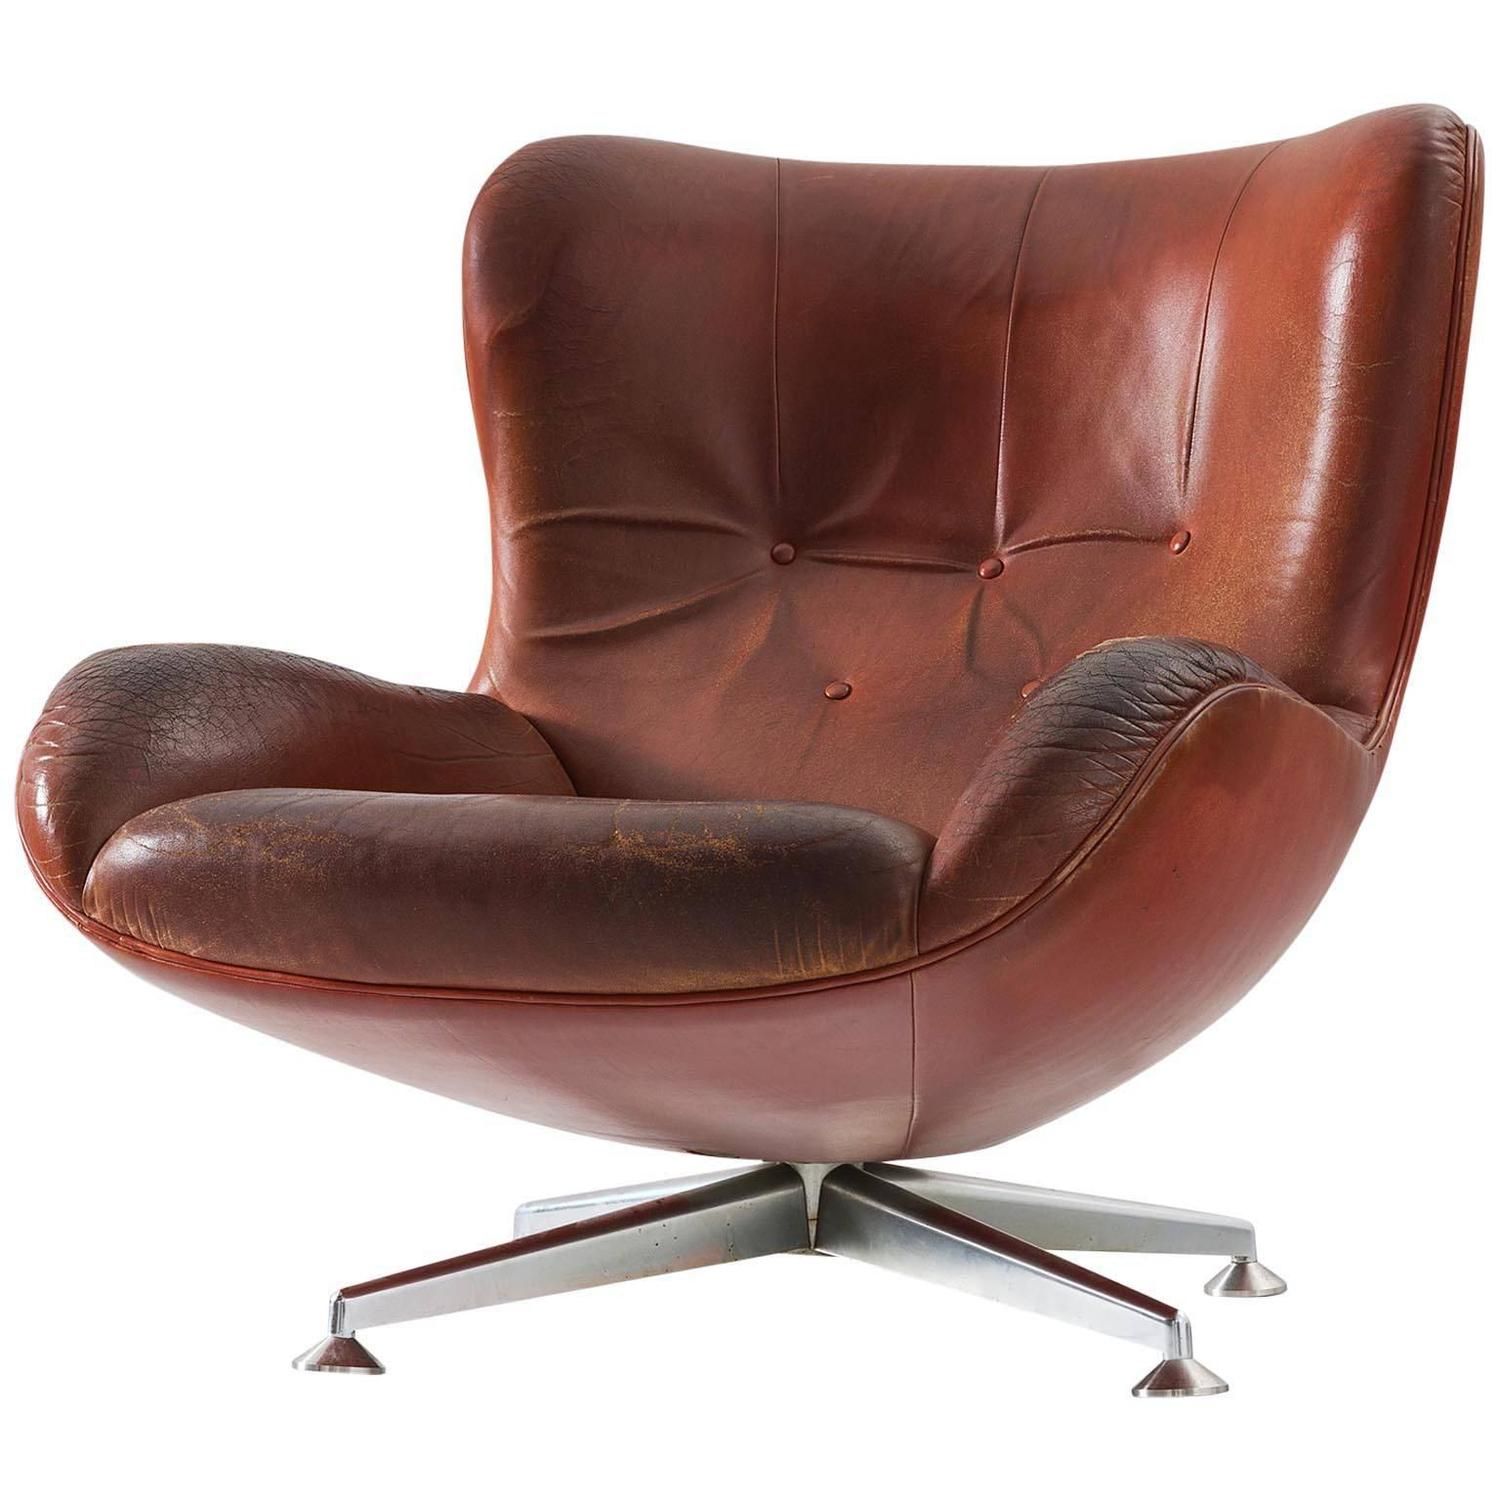 Buy leather recliner chairs for extra
comfort